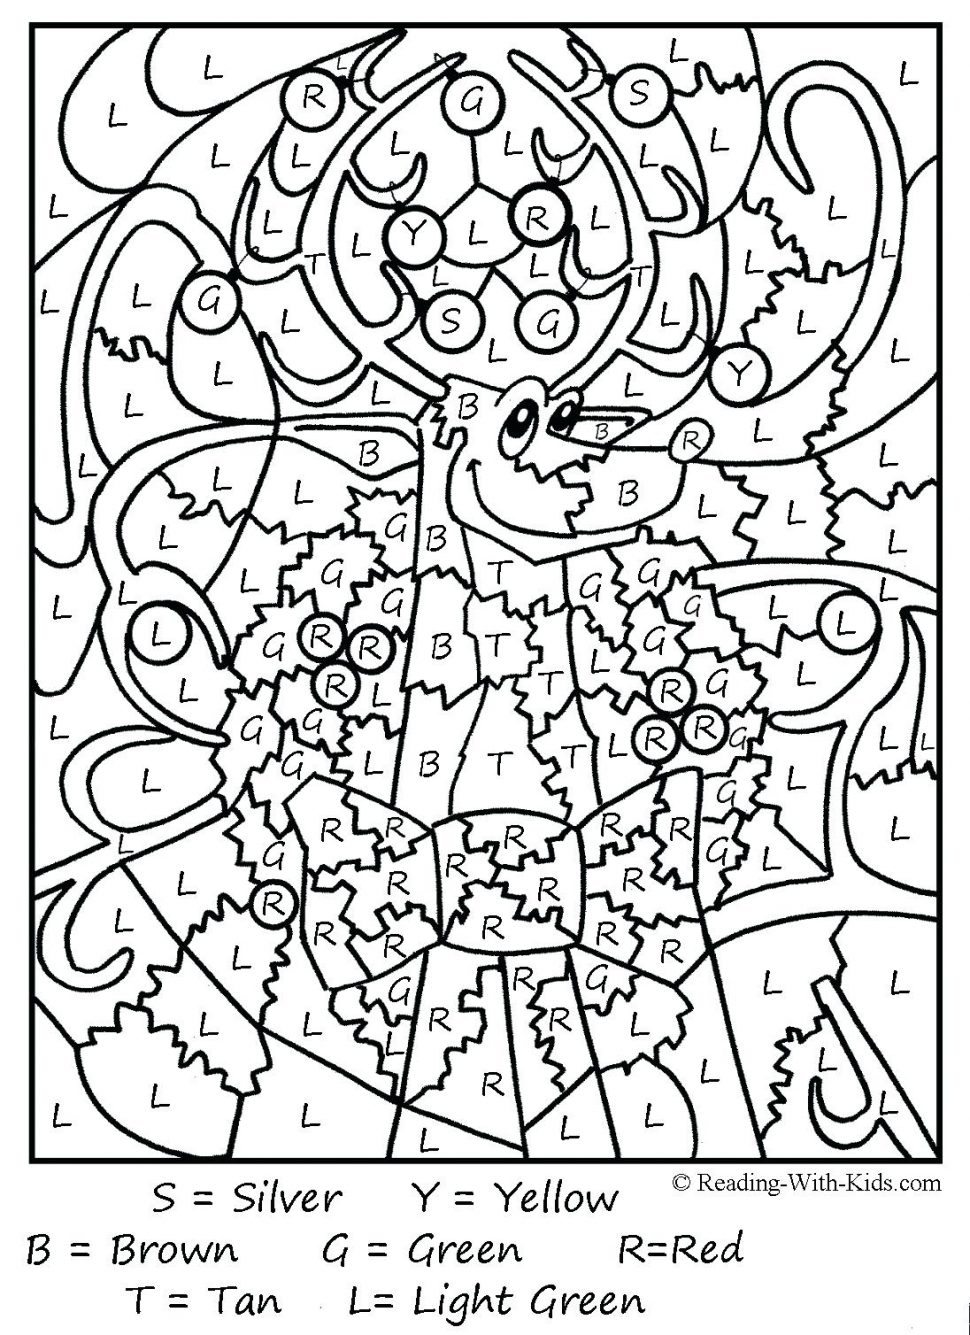 Printable Colorama Coloring Pages at GetDrawings Free